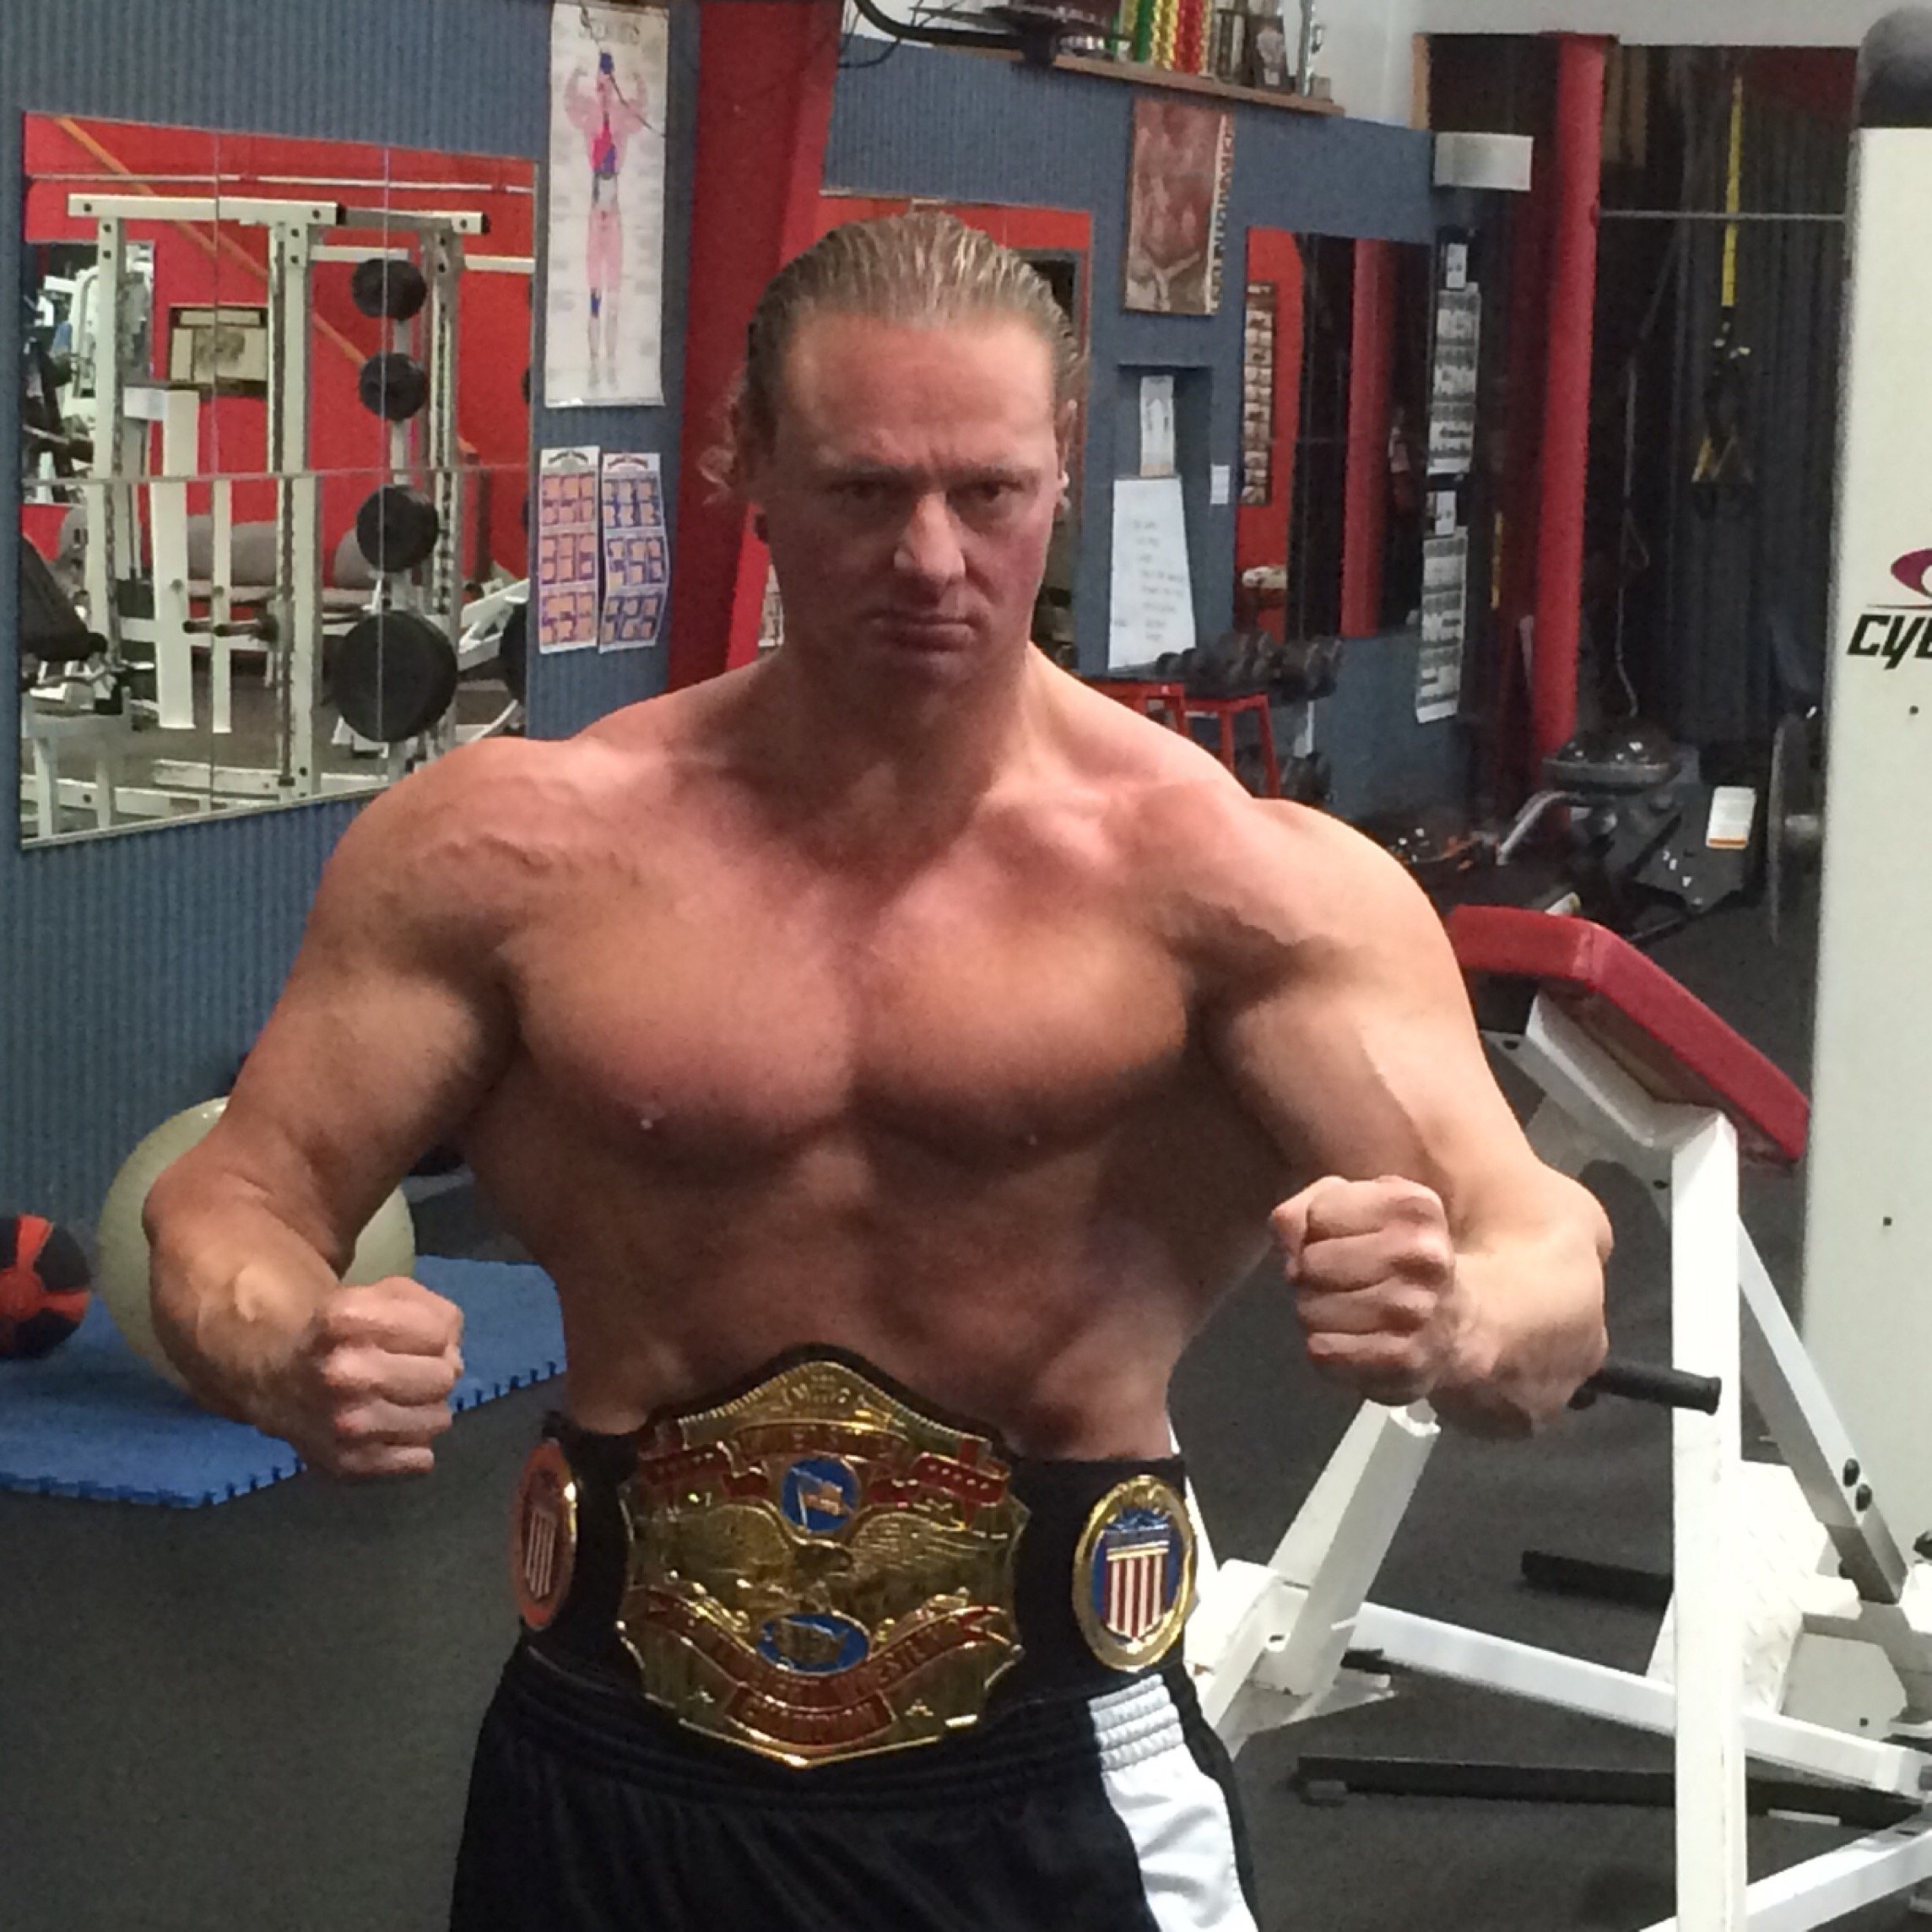 NPC national level competitor,  has competed in 37 NPC contests, also 3 Arnold Classic's.  Is formerly NWA united states heavyweight champion.